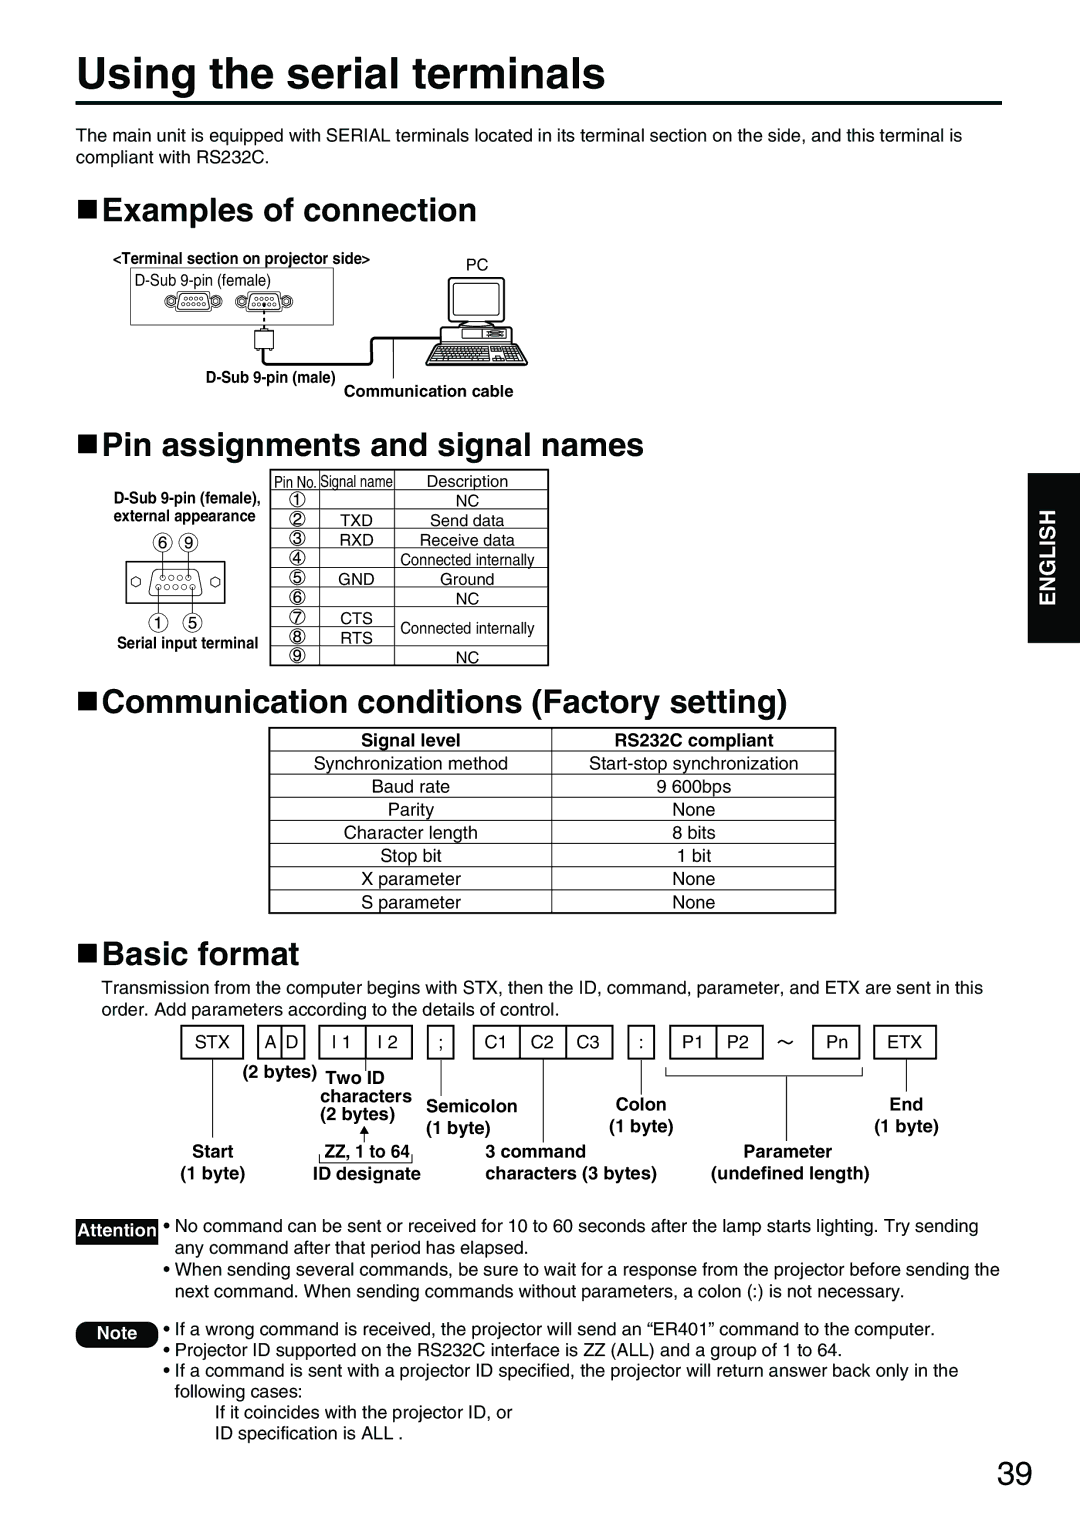 Panasonic PT-D3500E Using the serial terminals, Examples of connection, Pin assignments and signal names, Basic format 